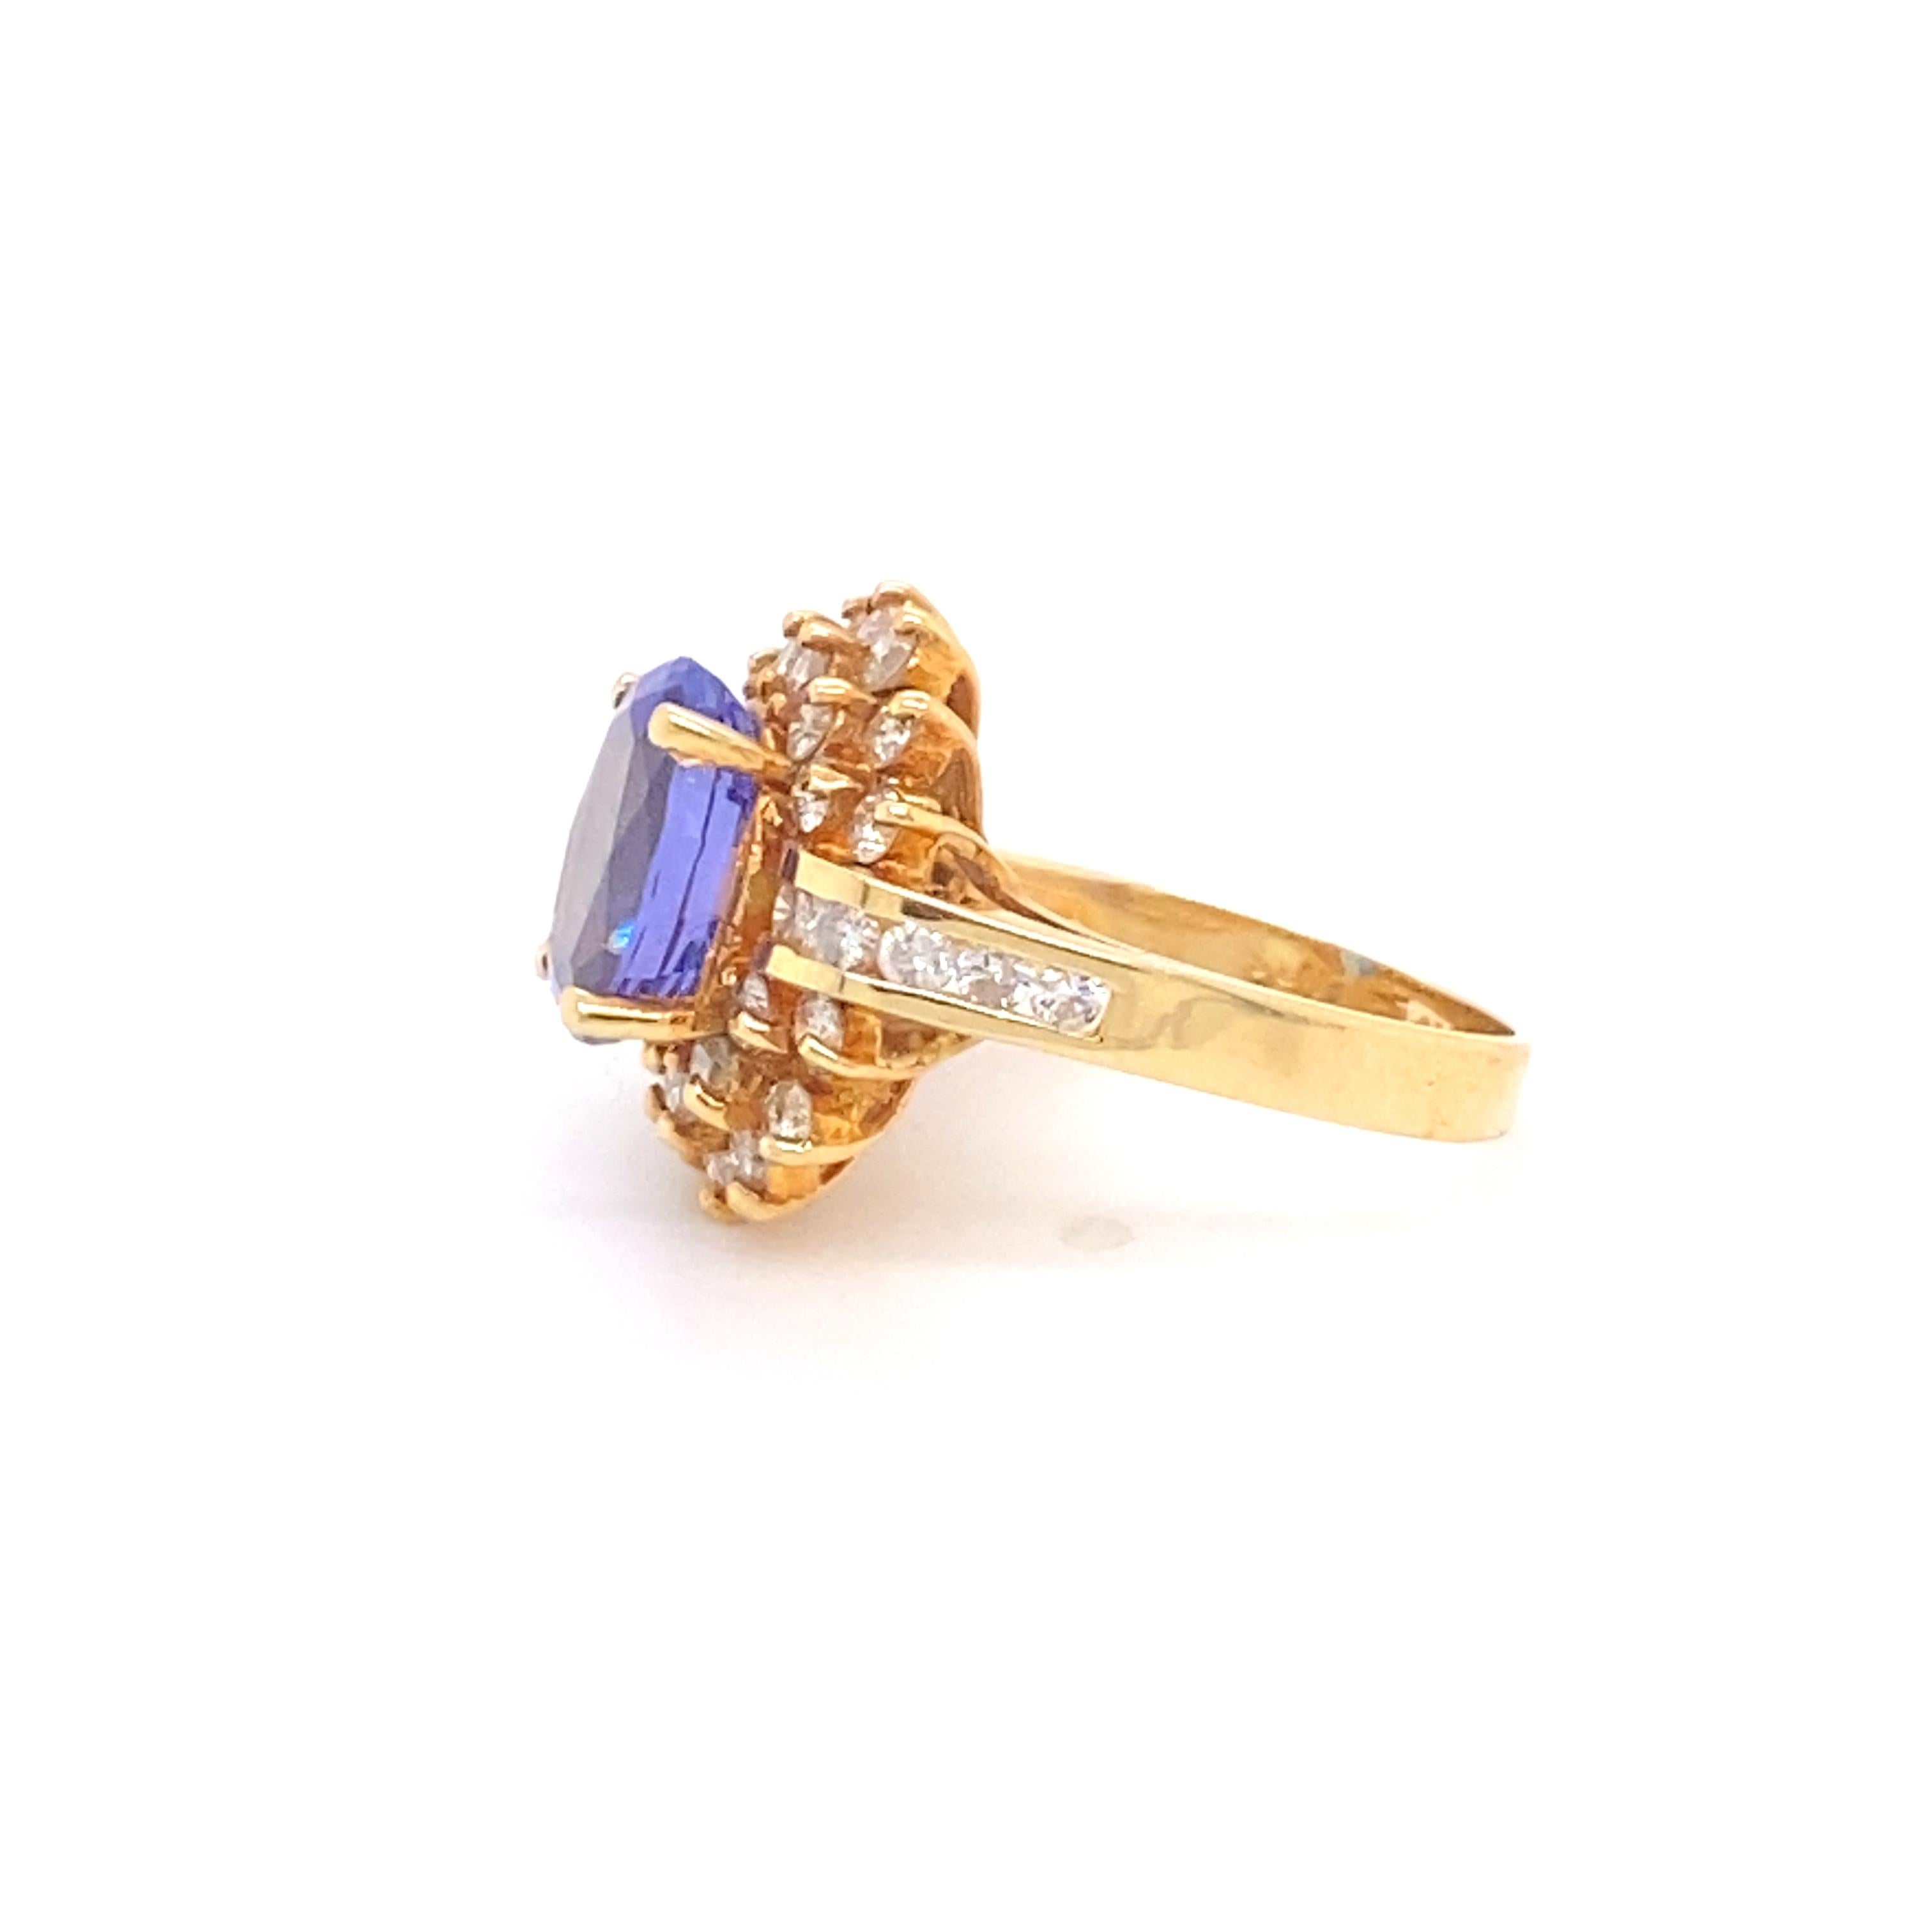 Oval Cut 2.0 Carat Oval Sapphire and 0.50 Carat Diamond Ring in 14 Karat Gold For Sale